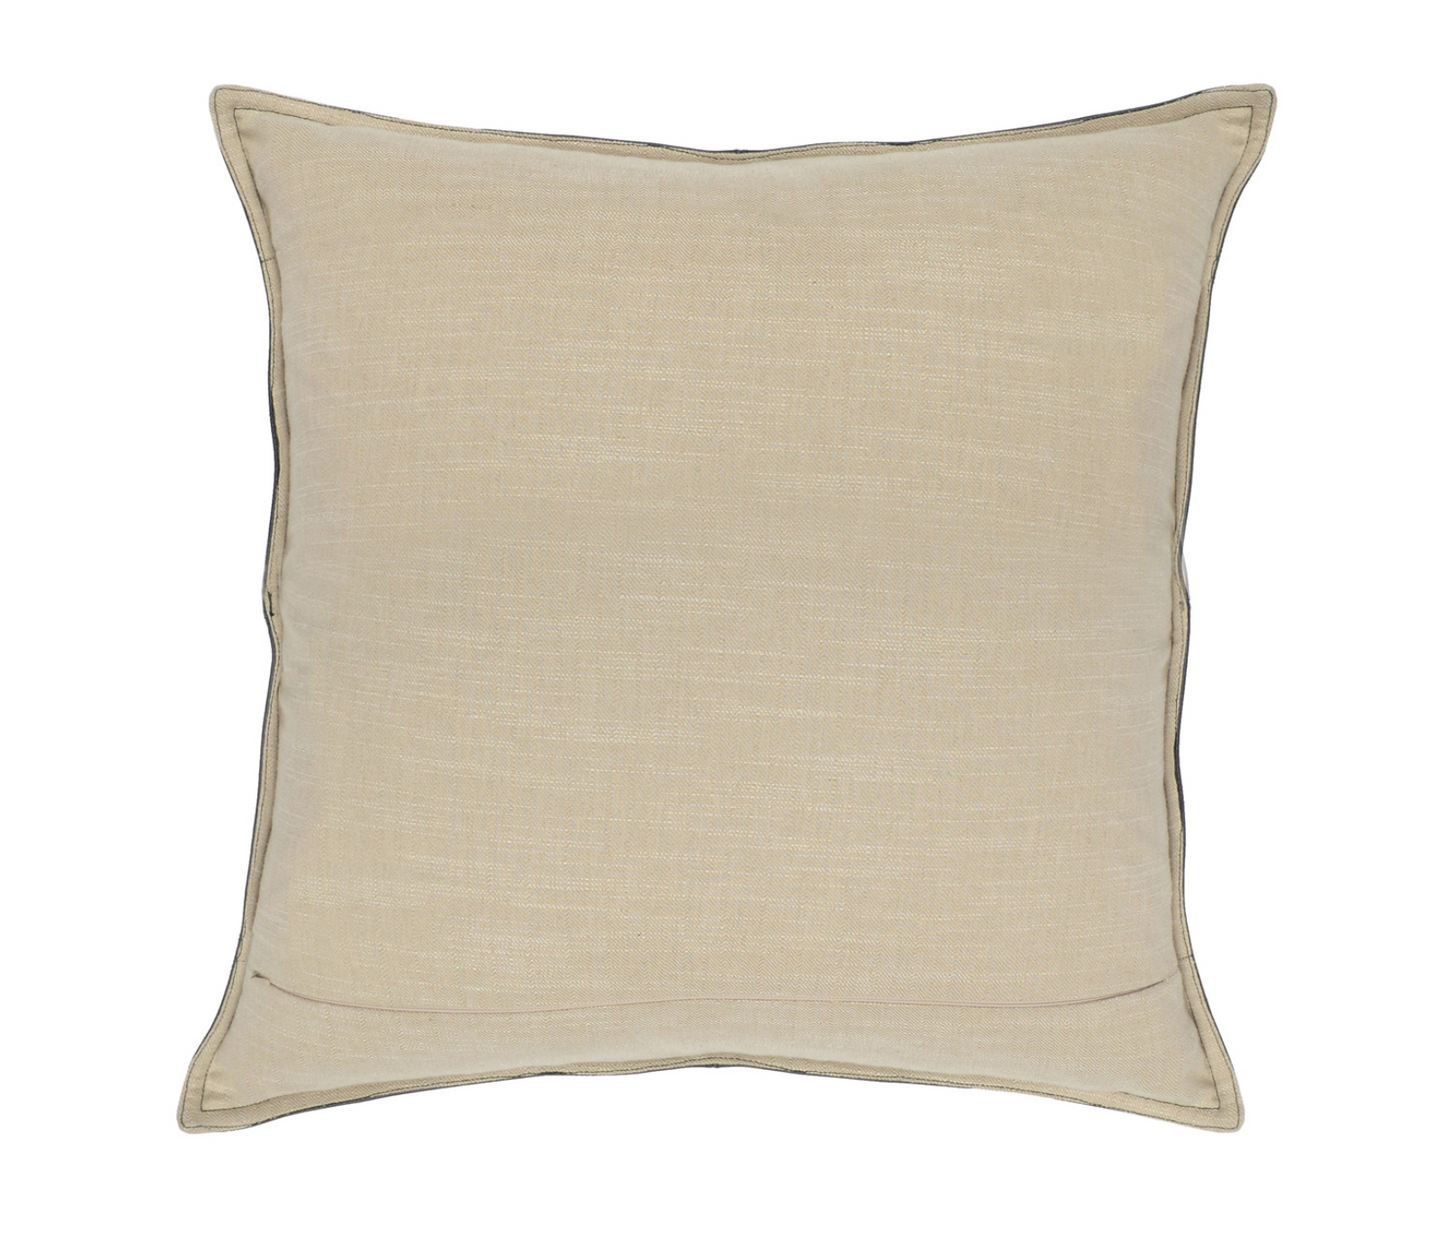 Chestnut Leather Pillow